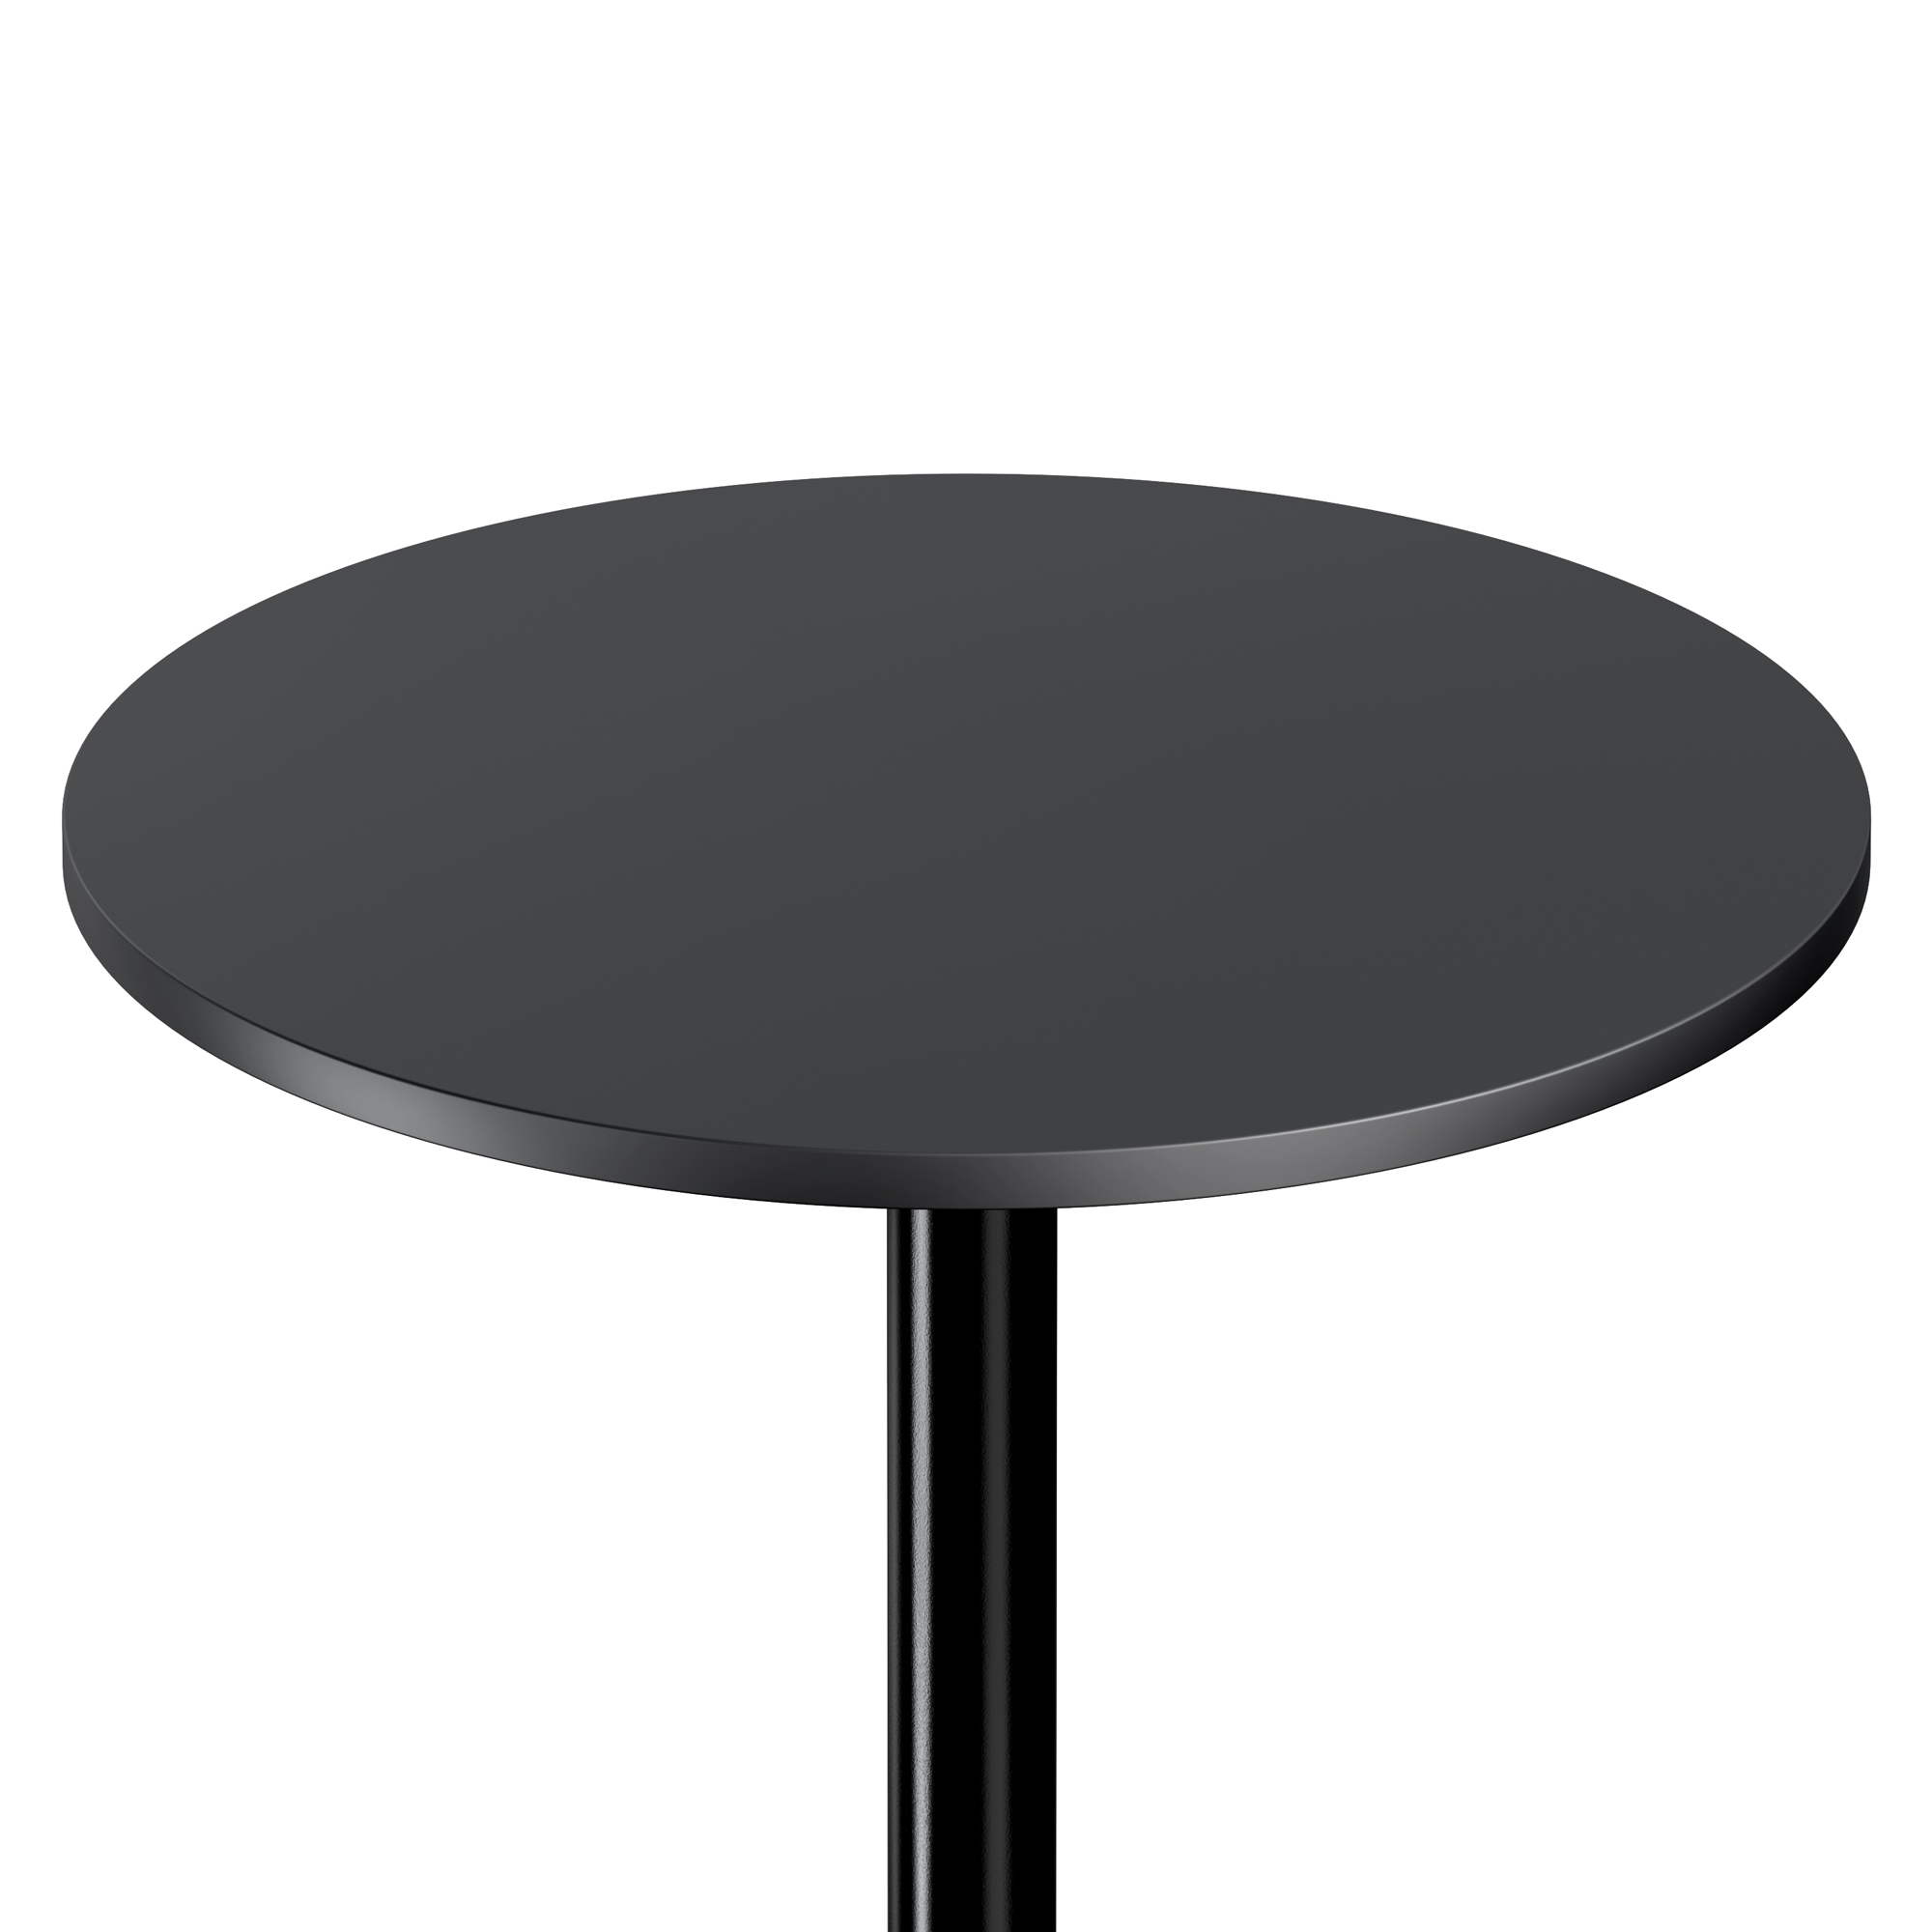 Winsome Obsidian Round Pub Table with MDF Wood Top, Legs, and Base, Black - image 4 of 7